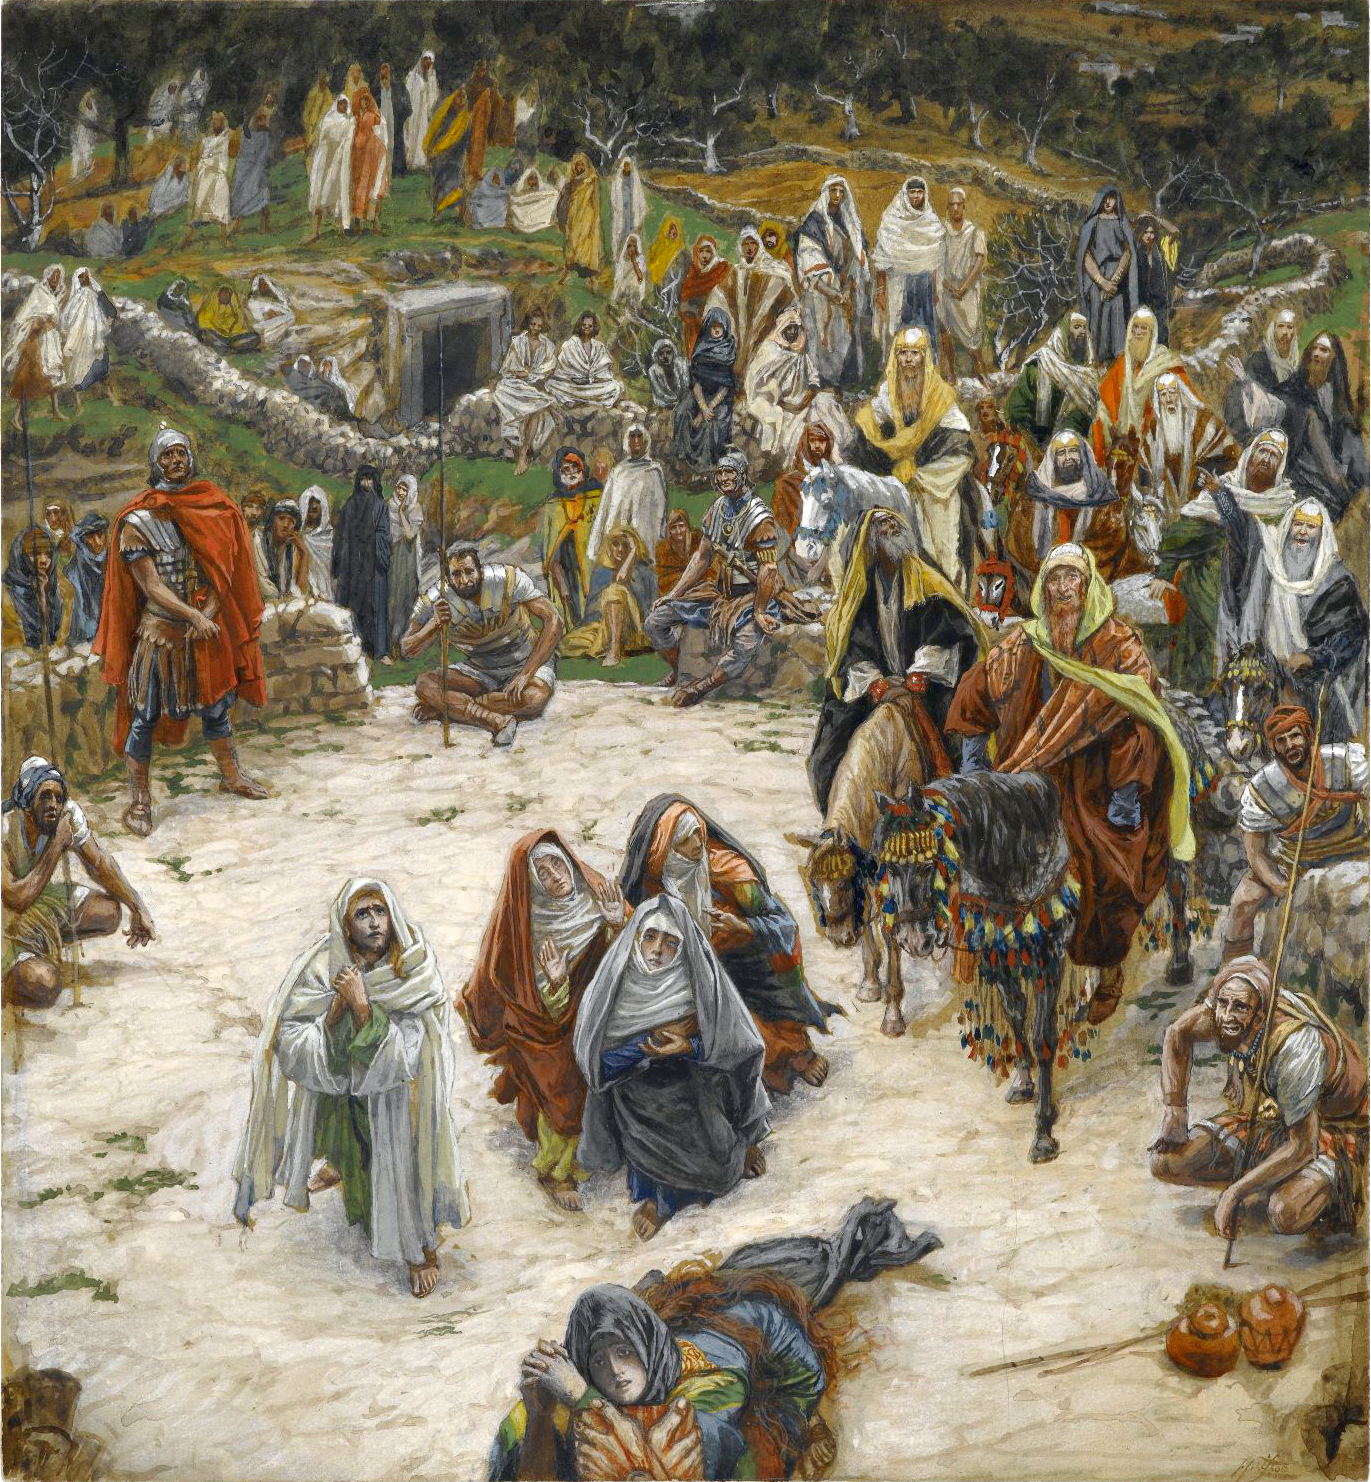 Crucifixion, seen from the Cross by James Tissot - Online Collection of Brooklyn Museum, c. 1890. (Brooklyn Museum, 2008)